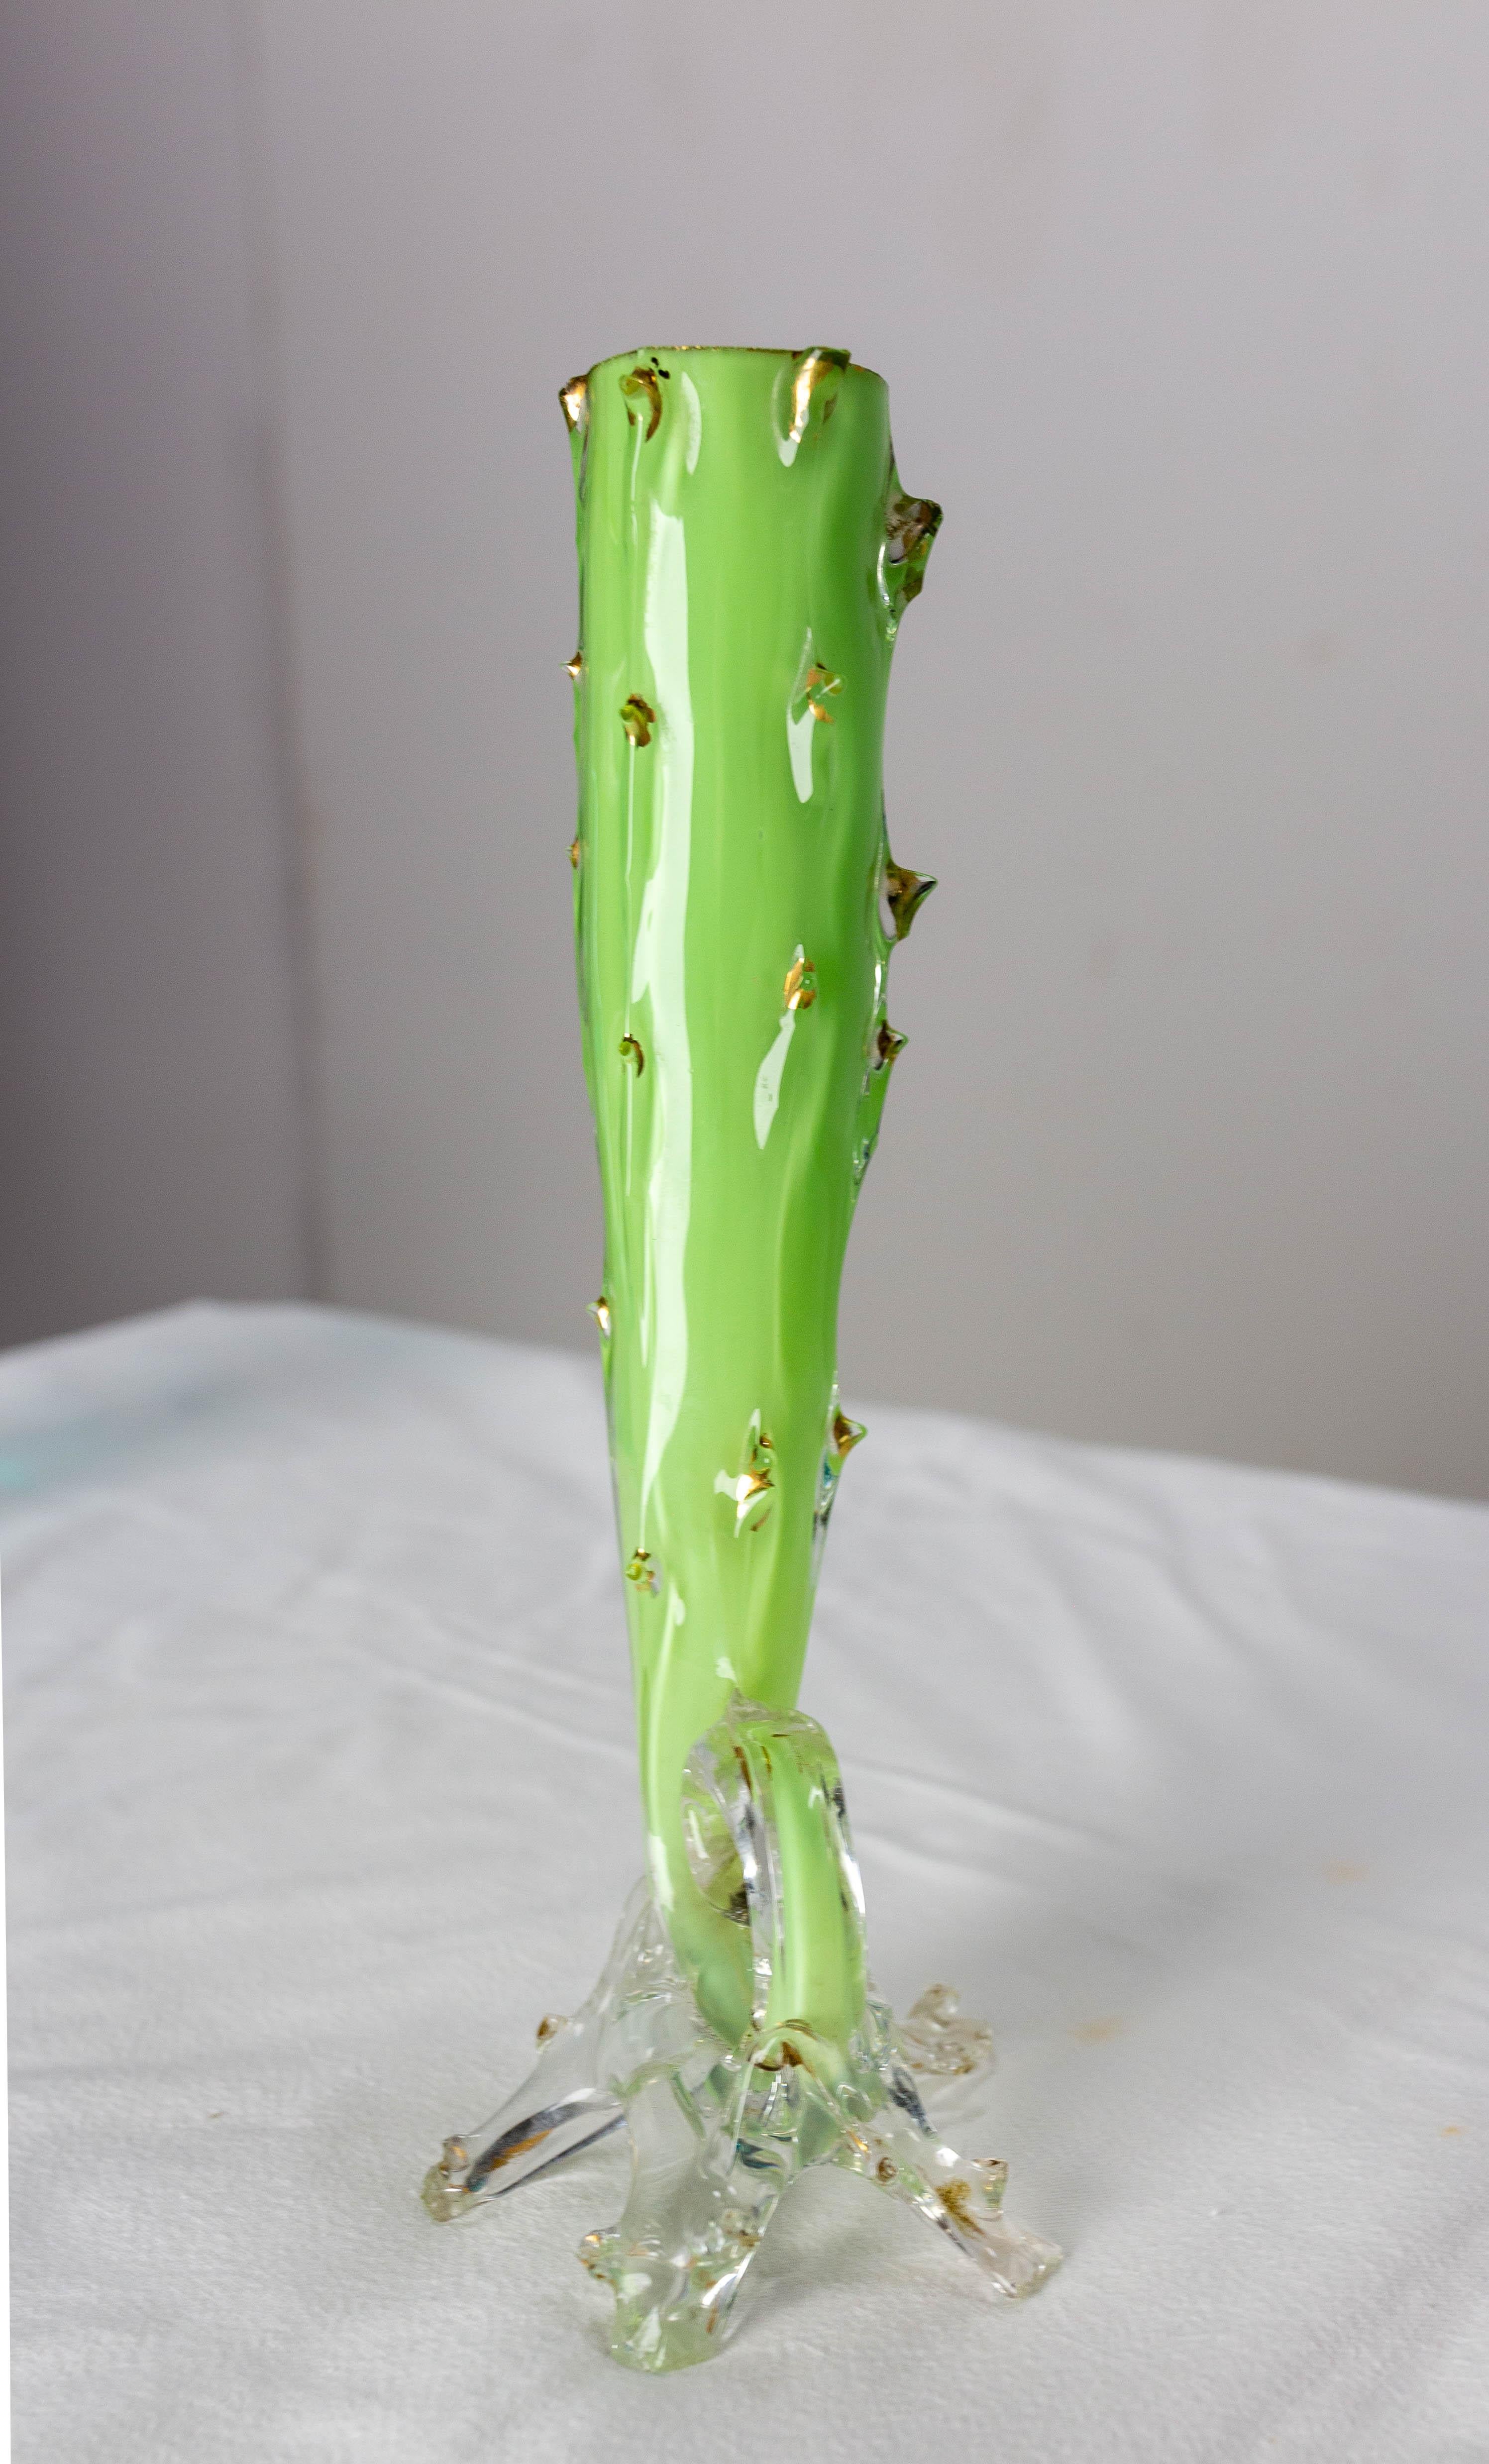 20th Century French Vase Soliflor Green and Golden Glass, Imitation of a Rose Stem, C. 1960 For Sale